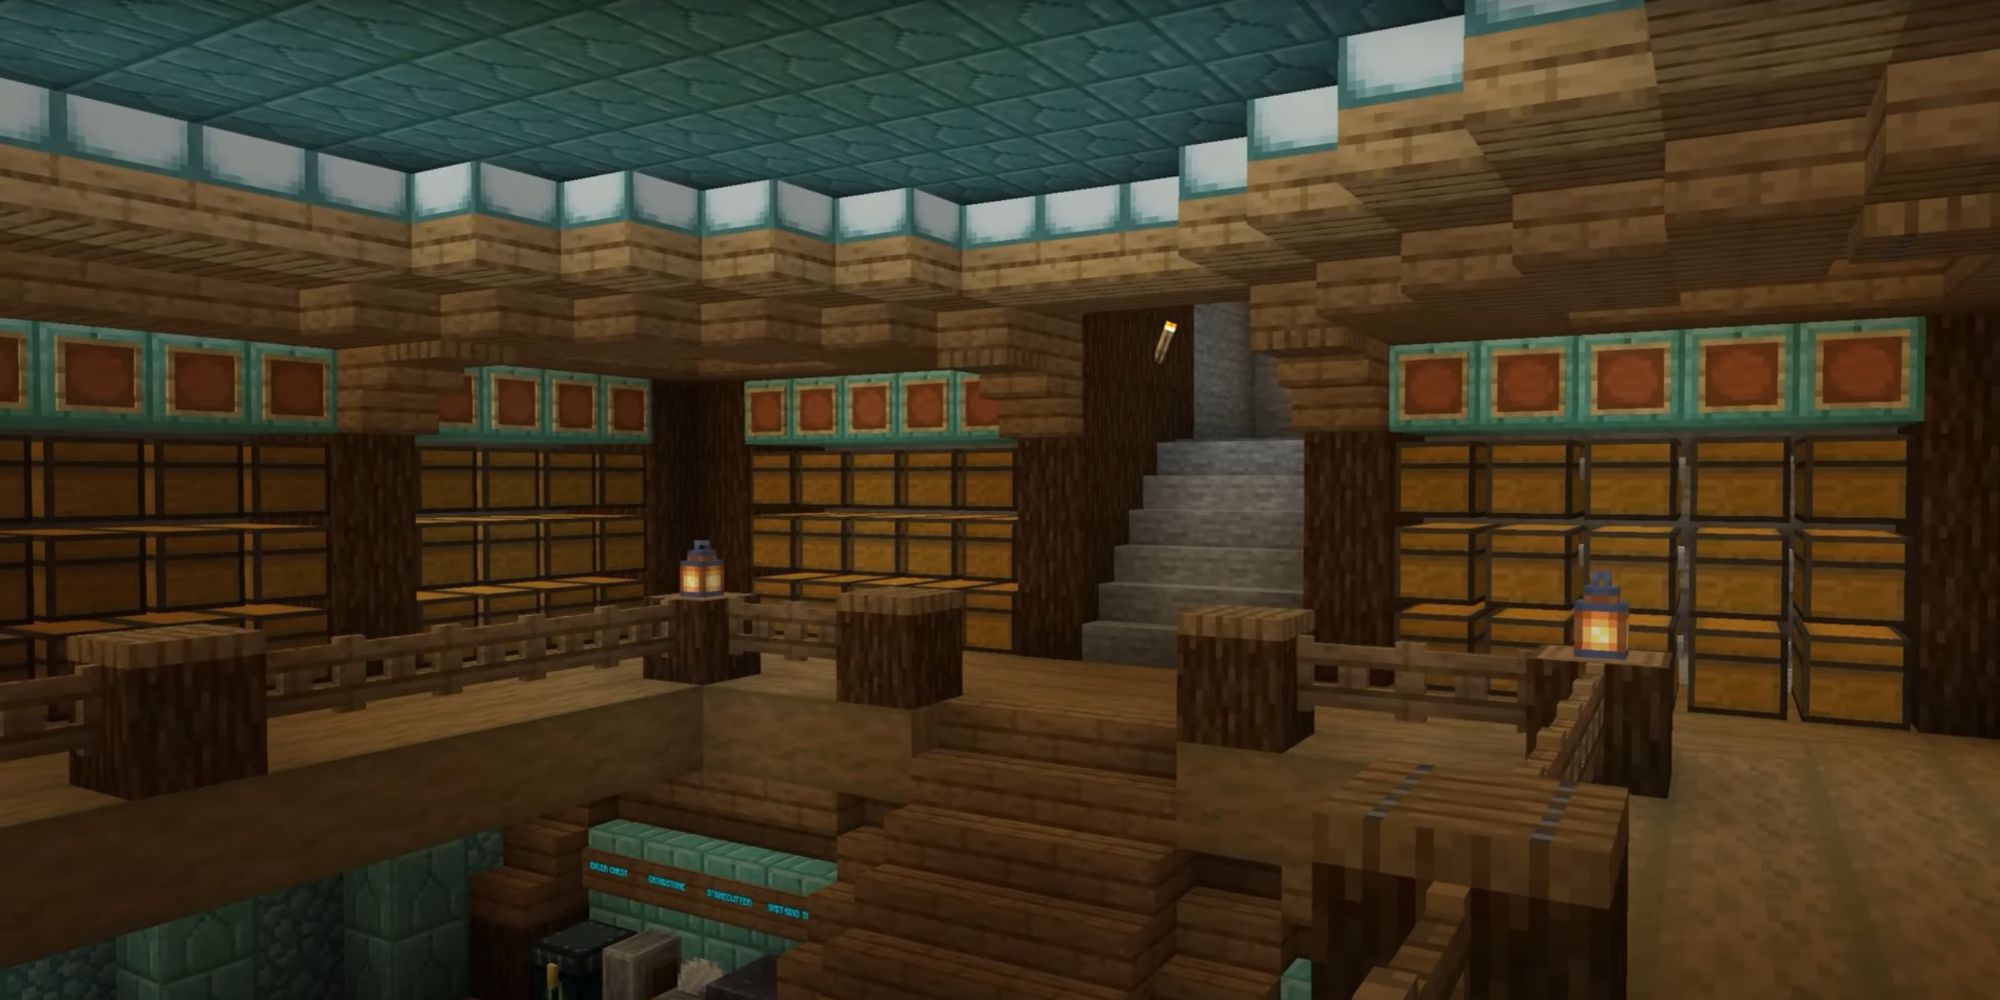 An imagef from Minecraft of an underwater base that is made completely underneath the floor of the ocean, so it resembles a regular underground home.